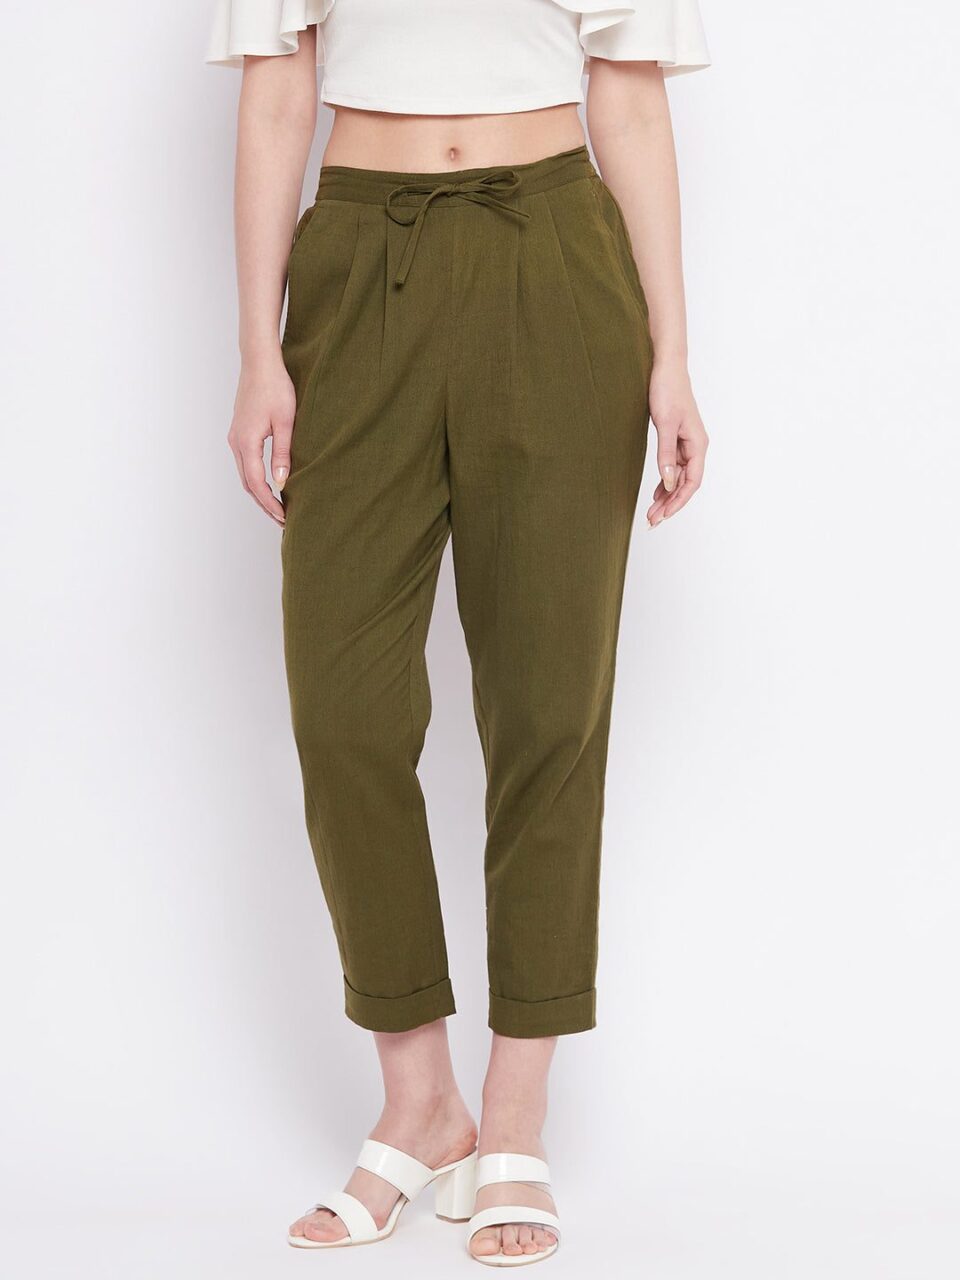 Olive Green Regular Fit Cotton Solid Trouser